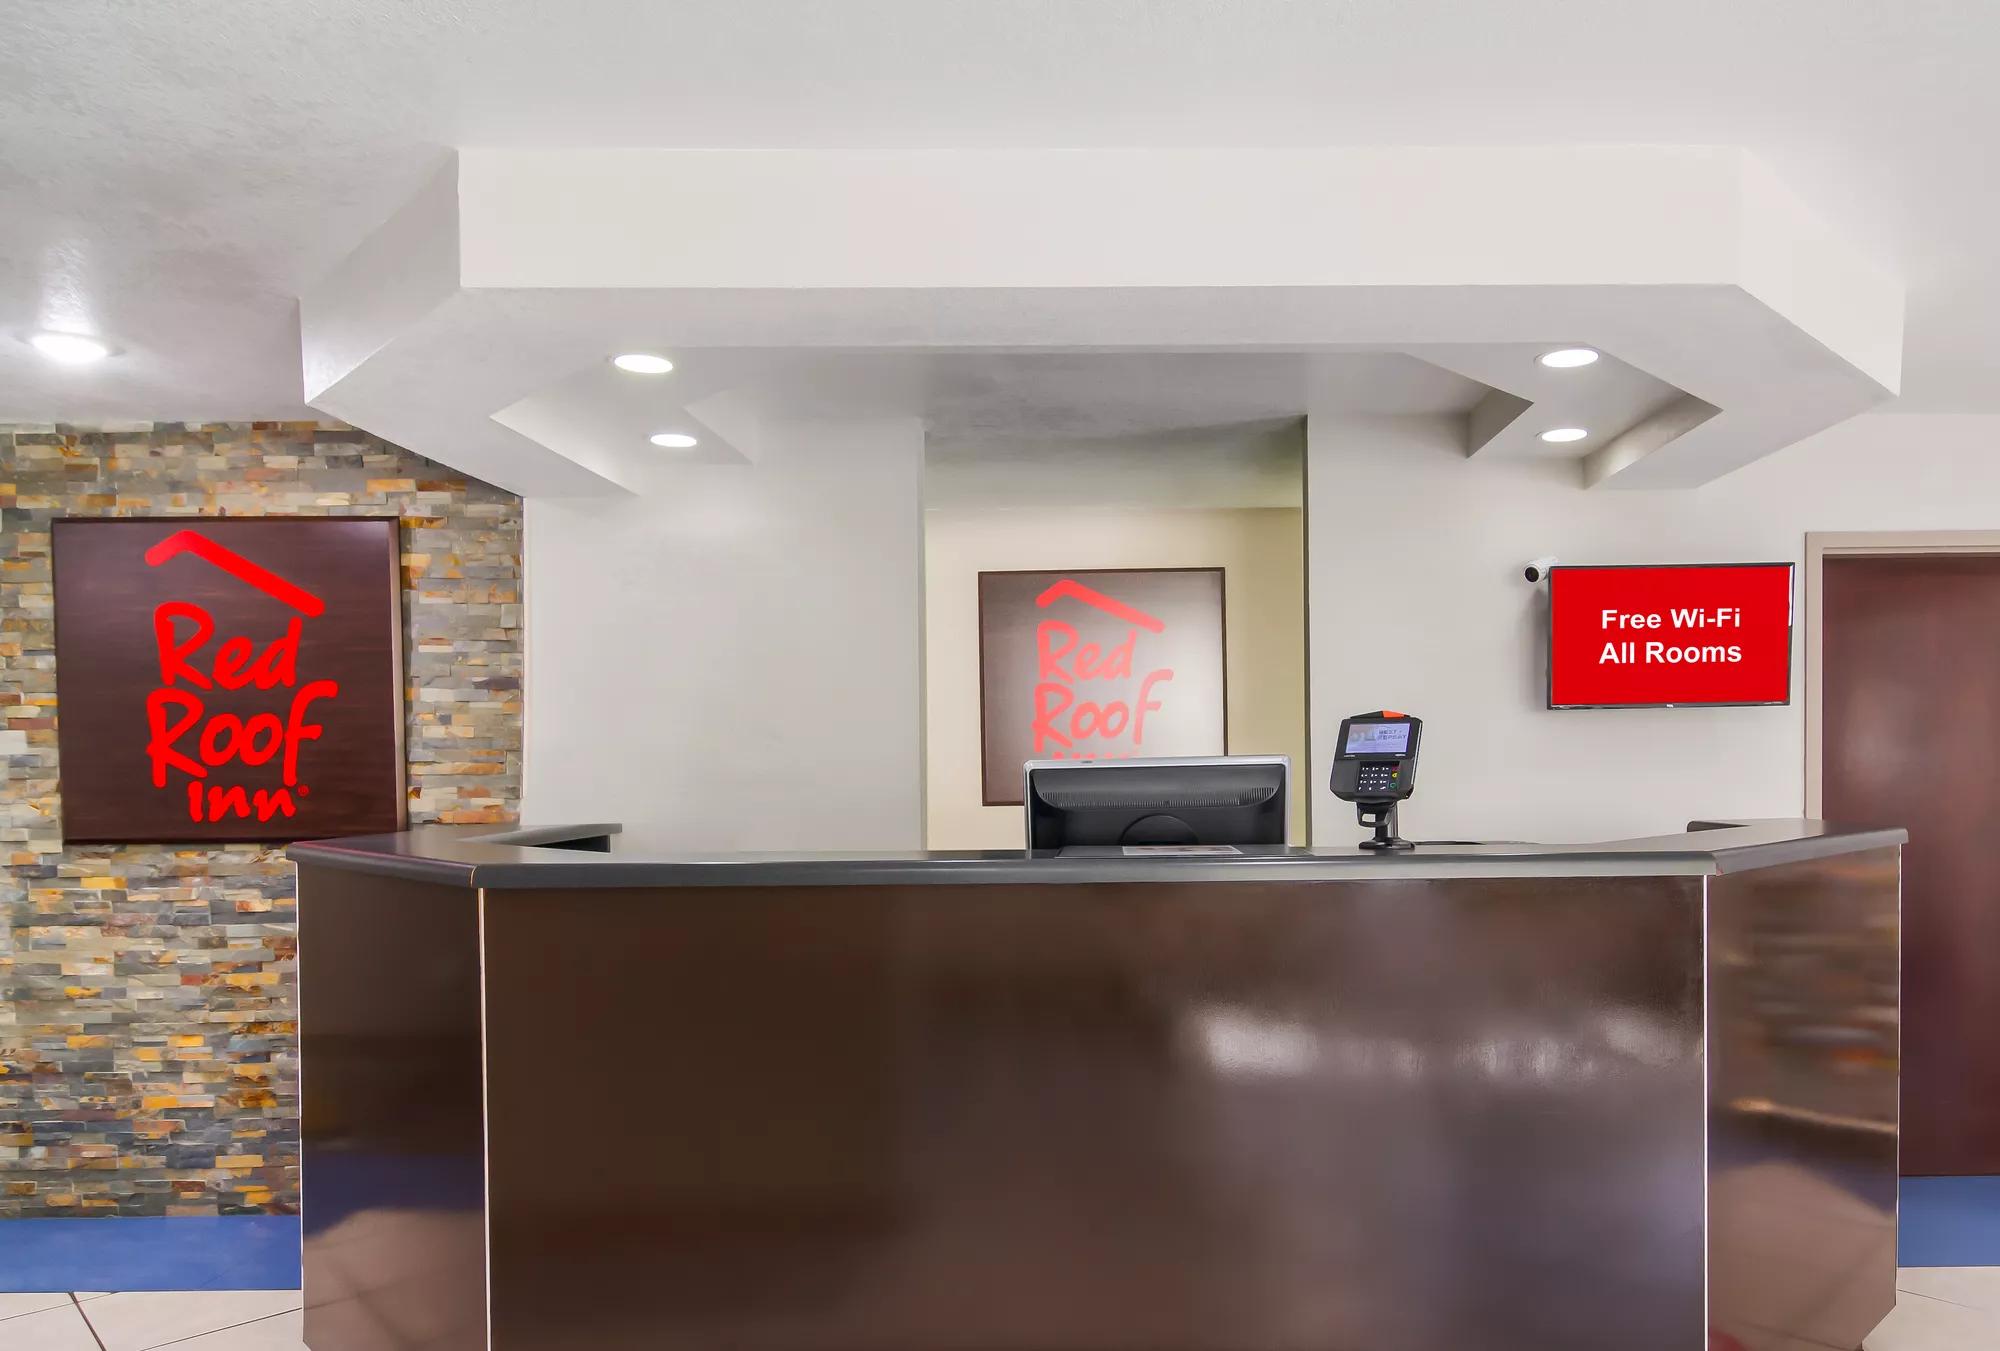 Red Roof Inn Darien – I-95 Front Desk and Lobby Image